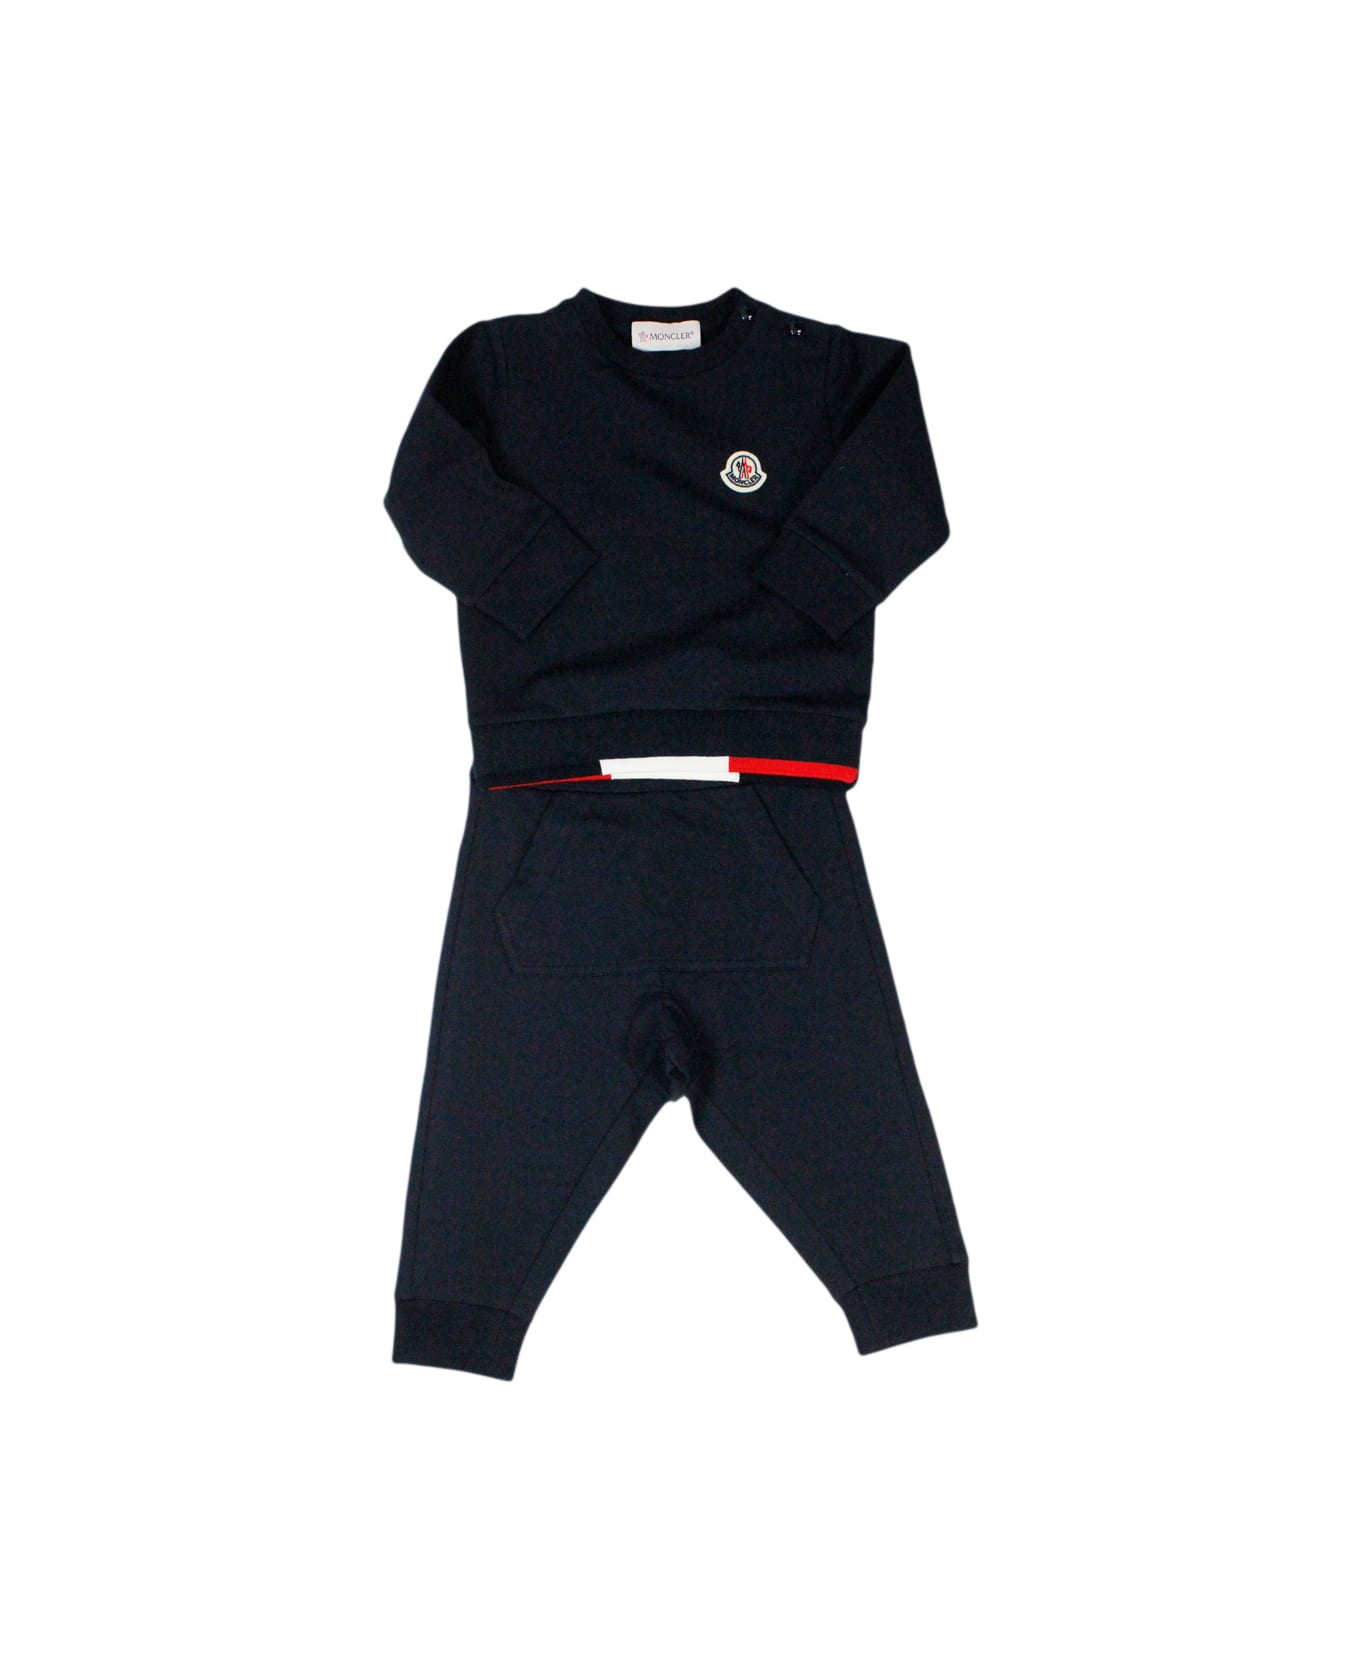 Moncler Cotton Jersey Tracksuit Consisting Of Trousers With Elastic embellished And Crewneck Sweatshirt - Blu